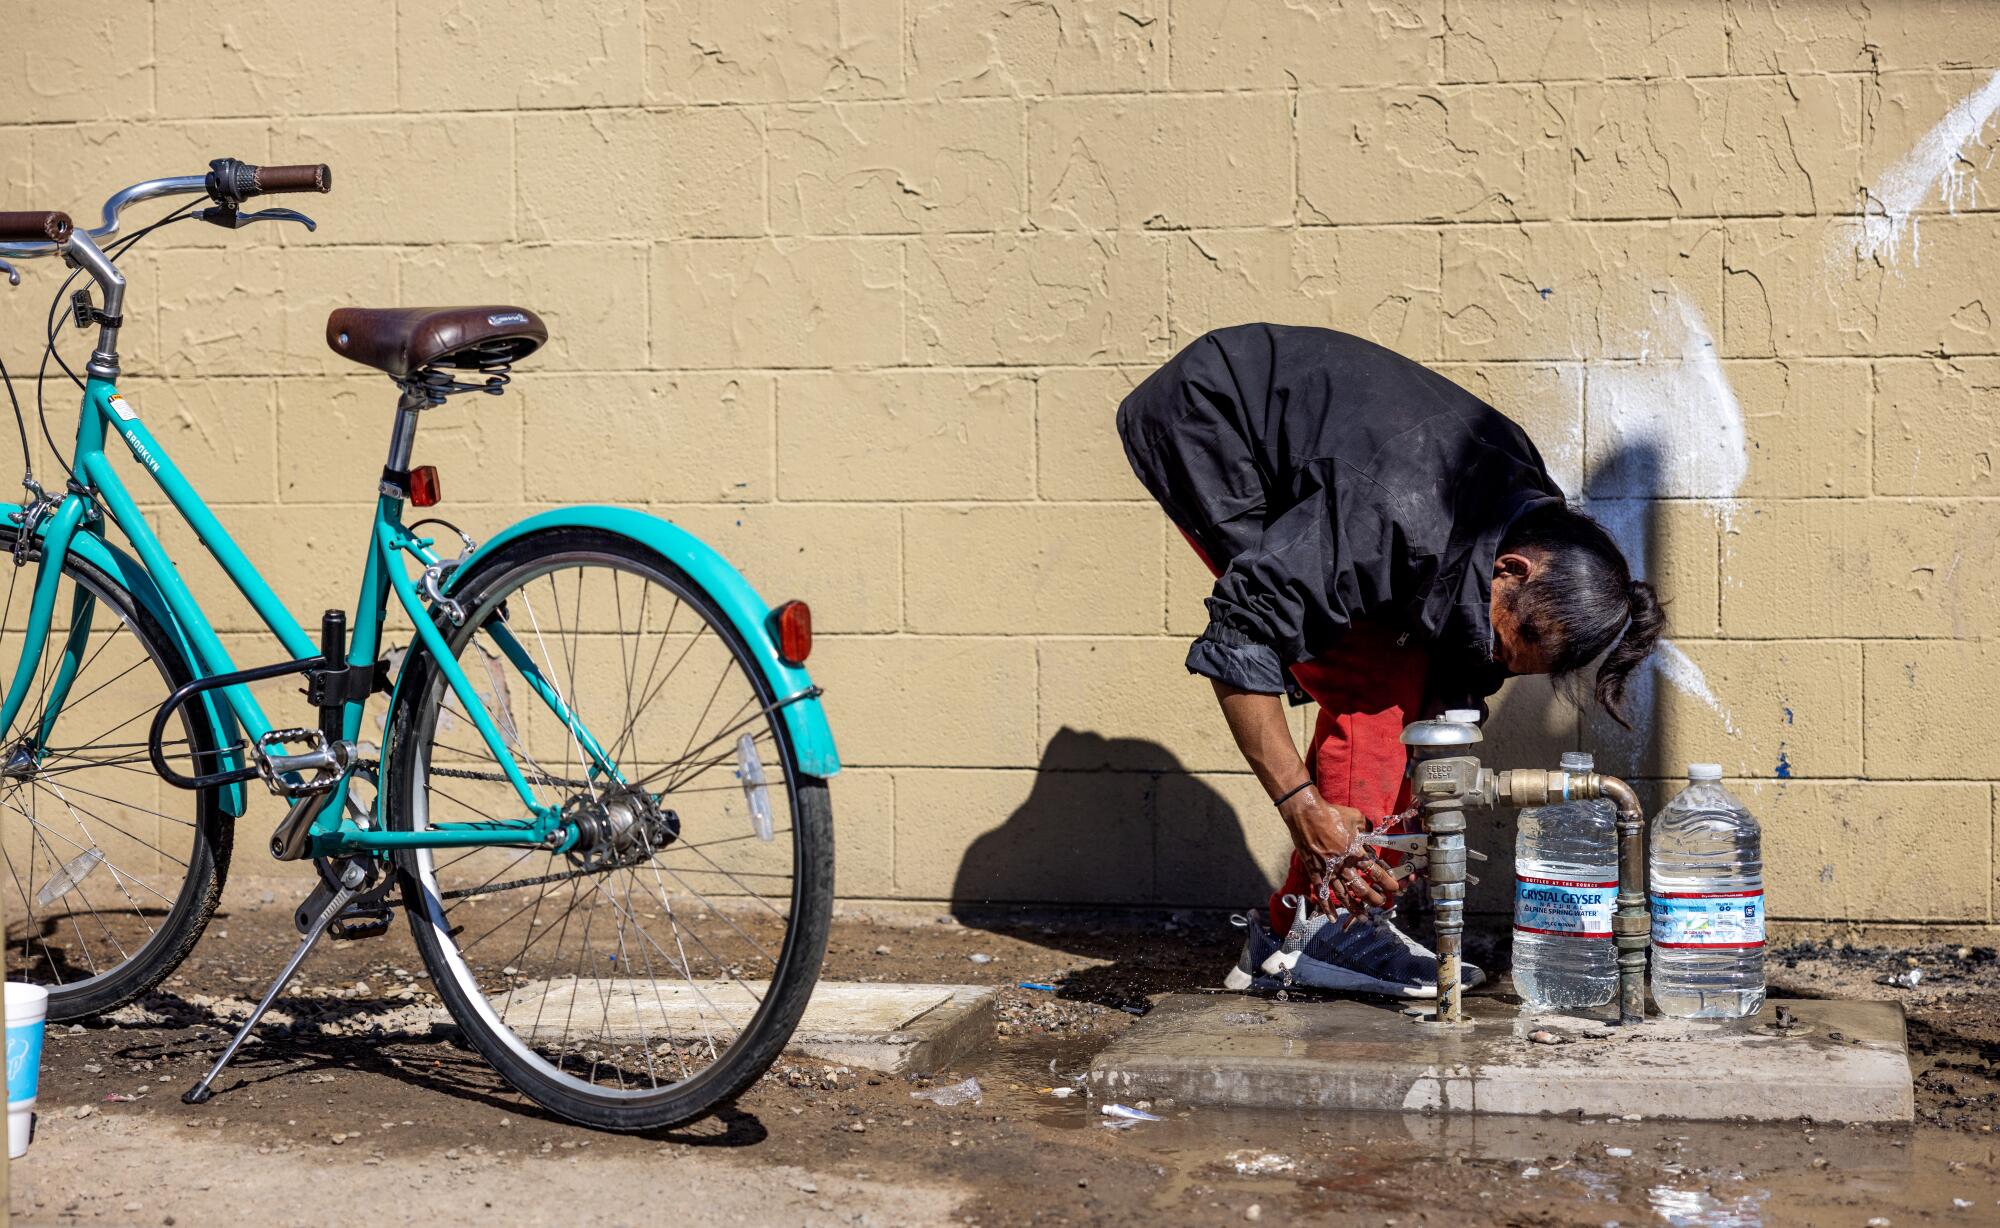 A person with plastic water jugs bends over near a parked bicycle to open a valve against a wall